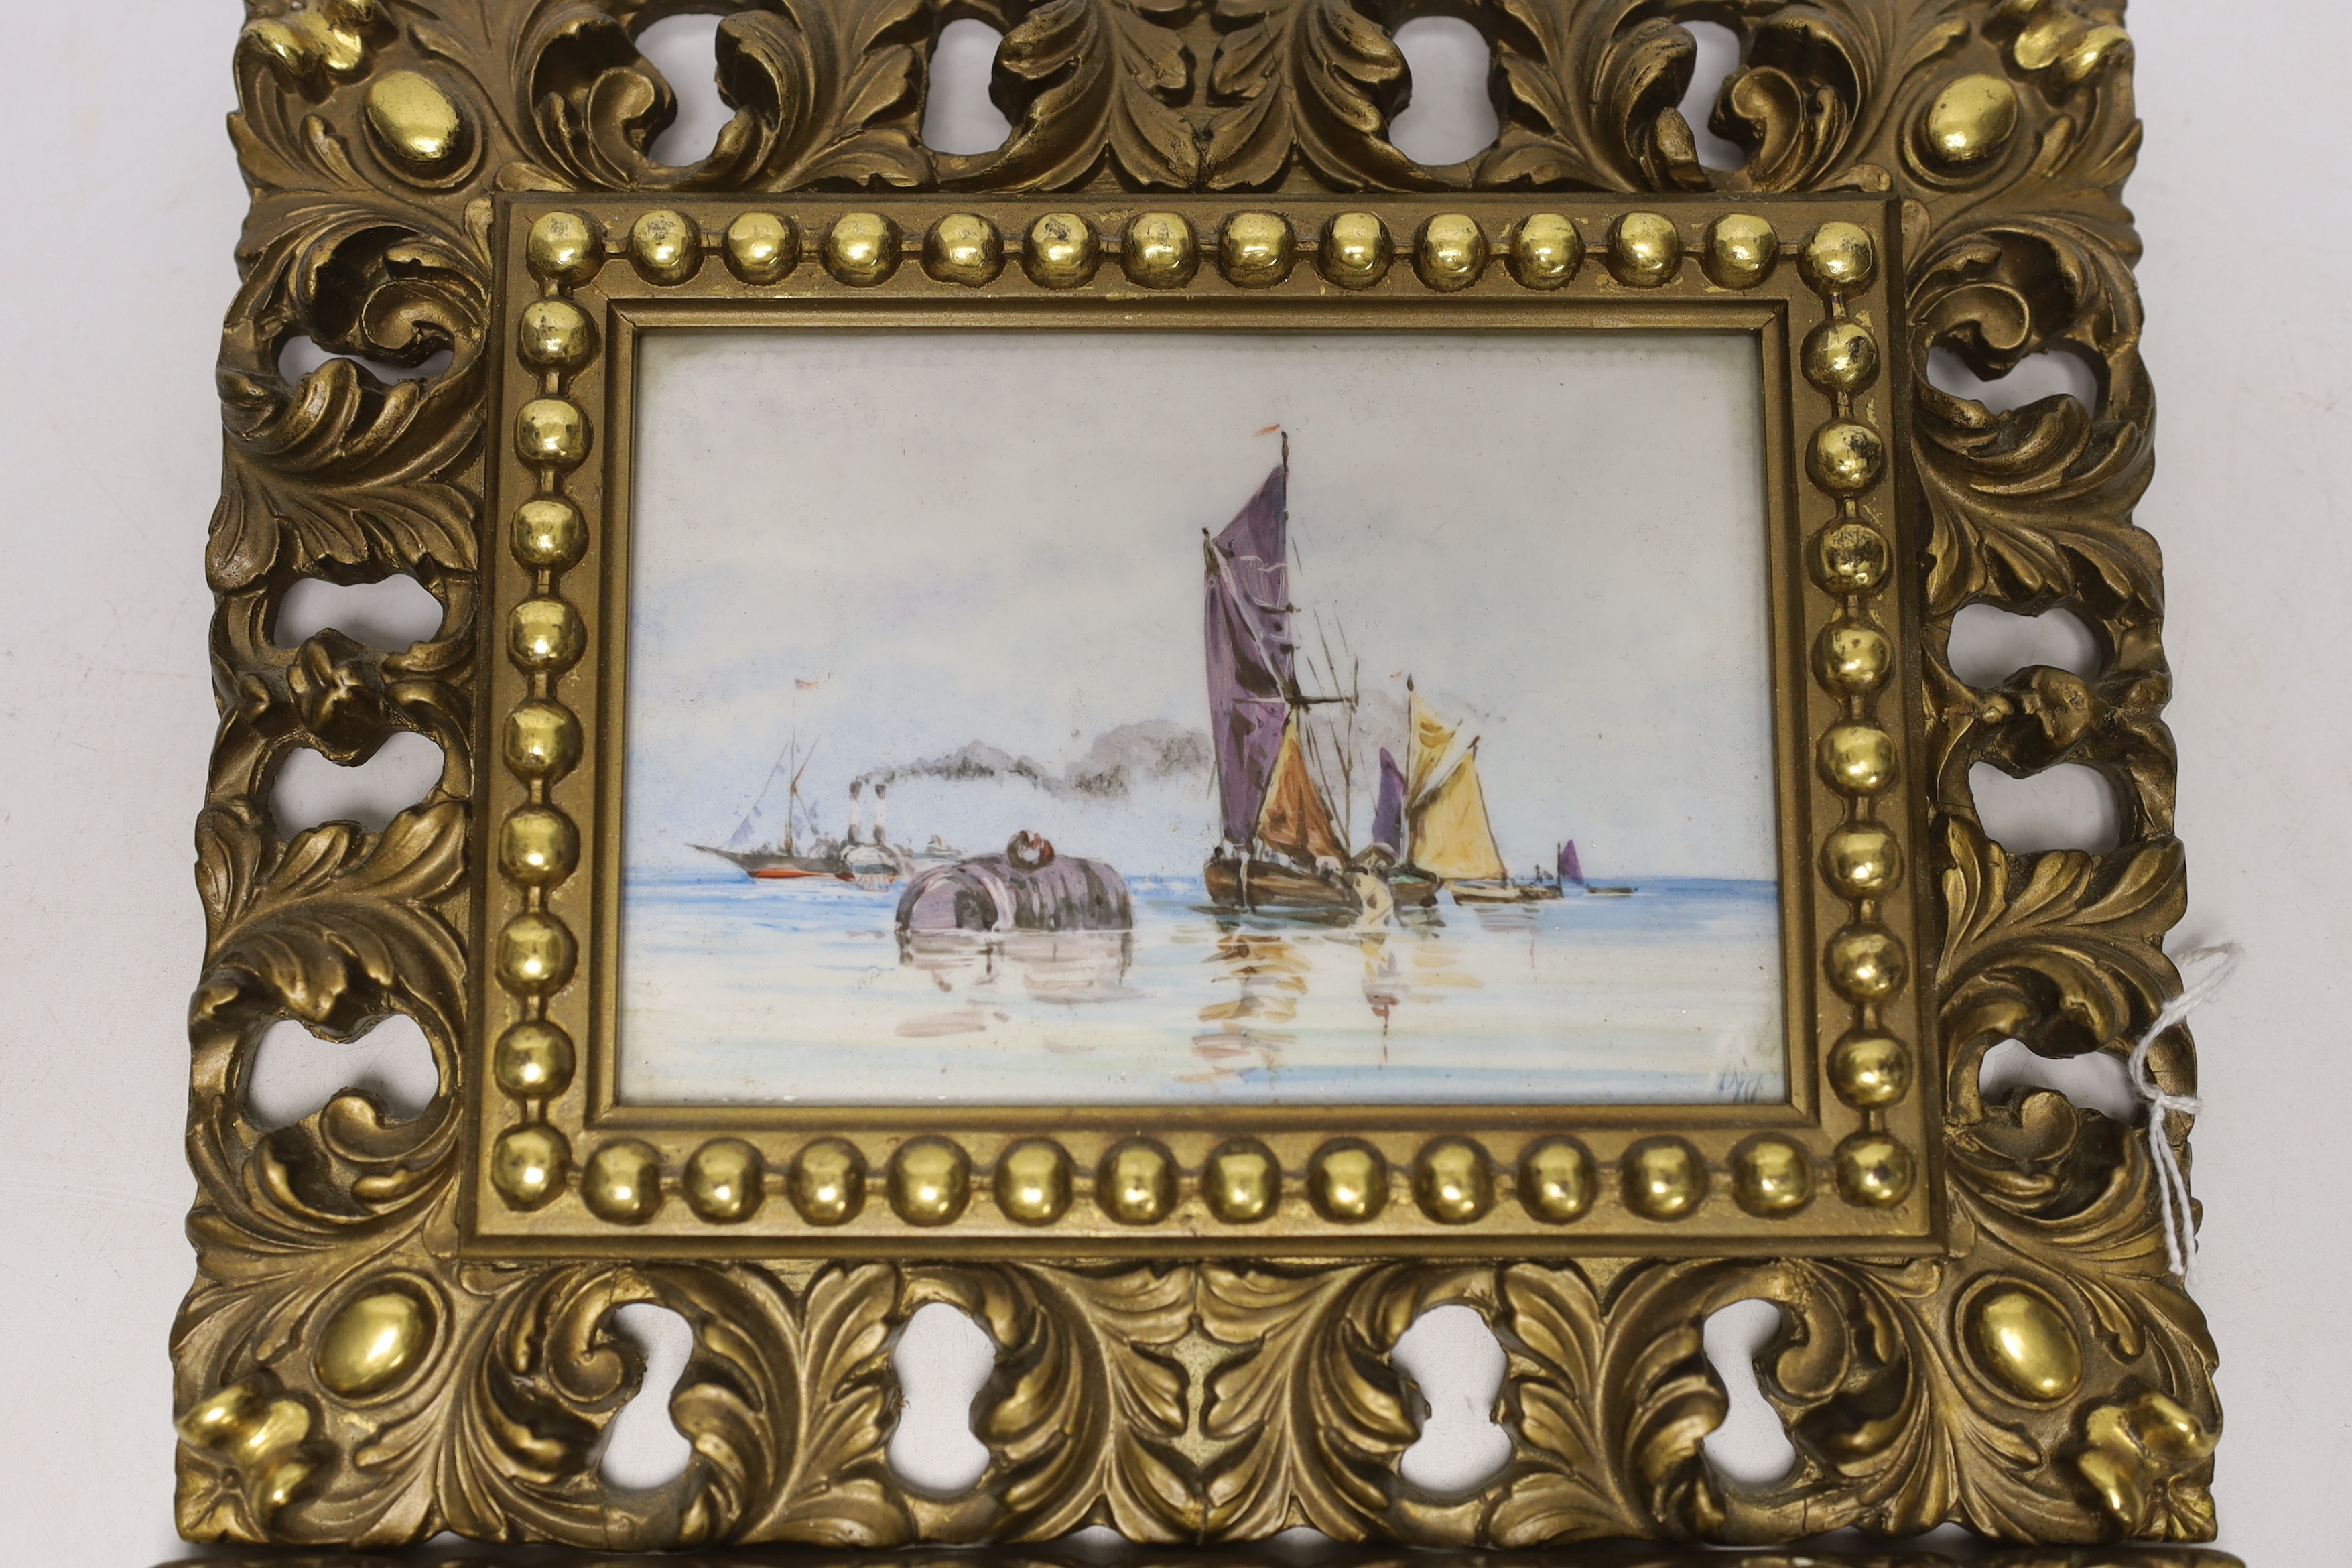 A pair of gilt framed painted porcelain plaques, indistinctly signed, 10x14cm excluding frame